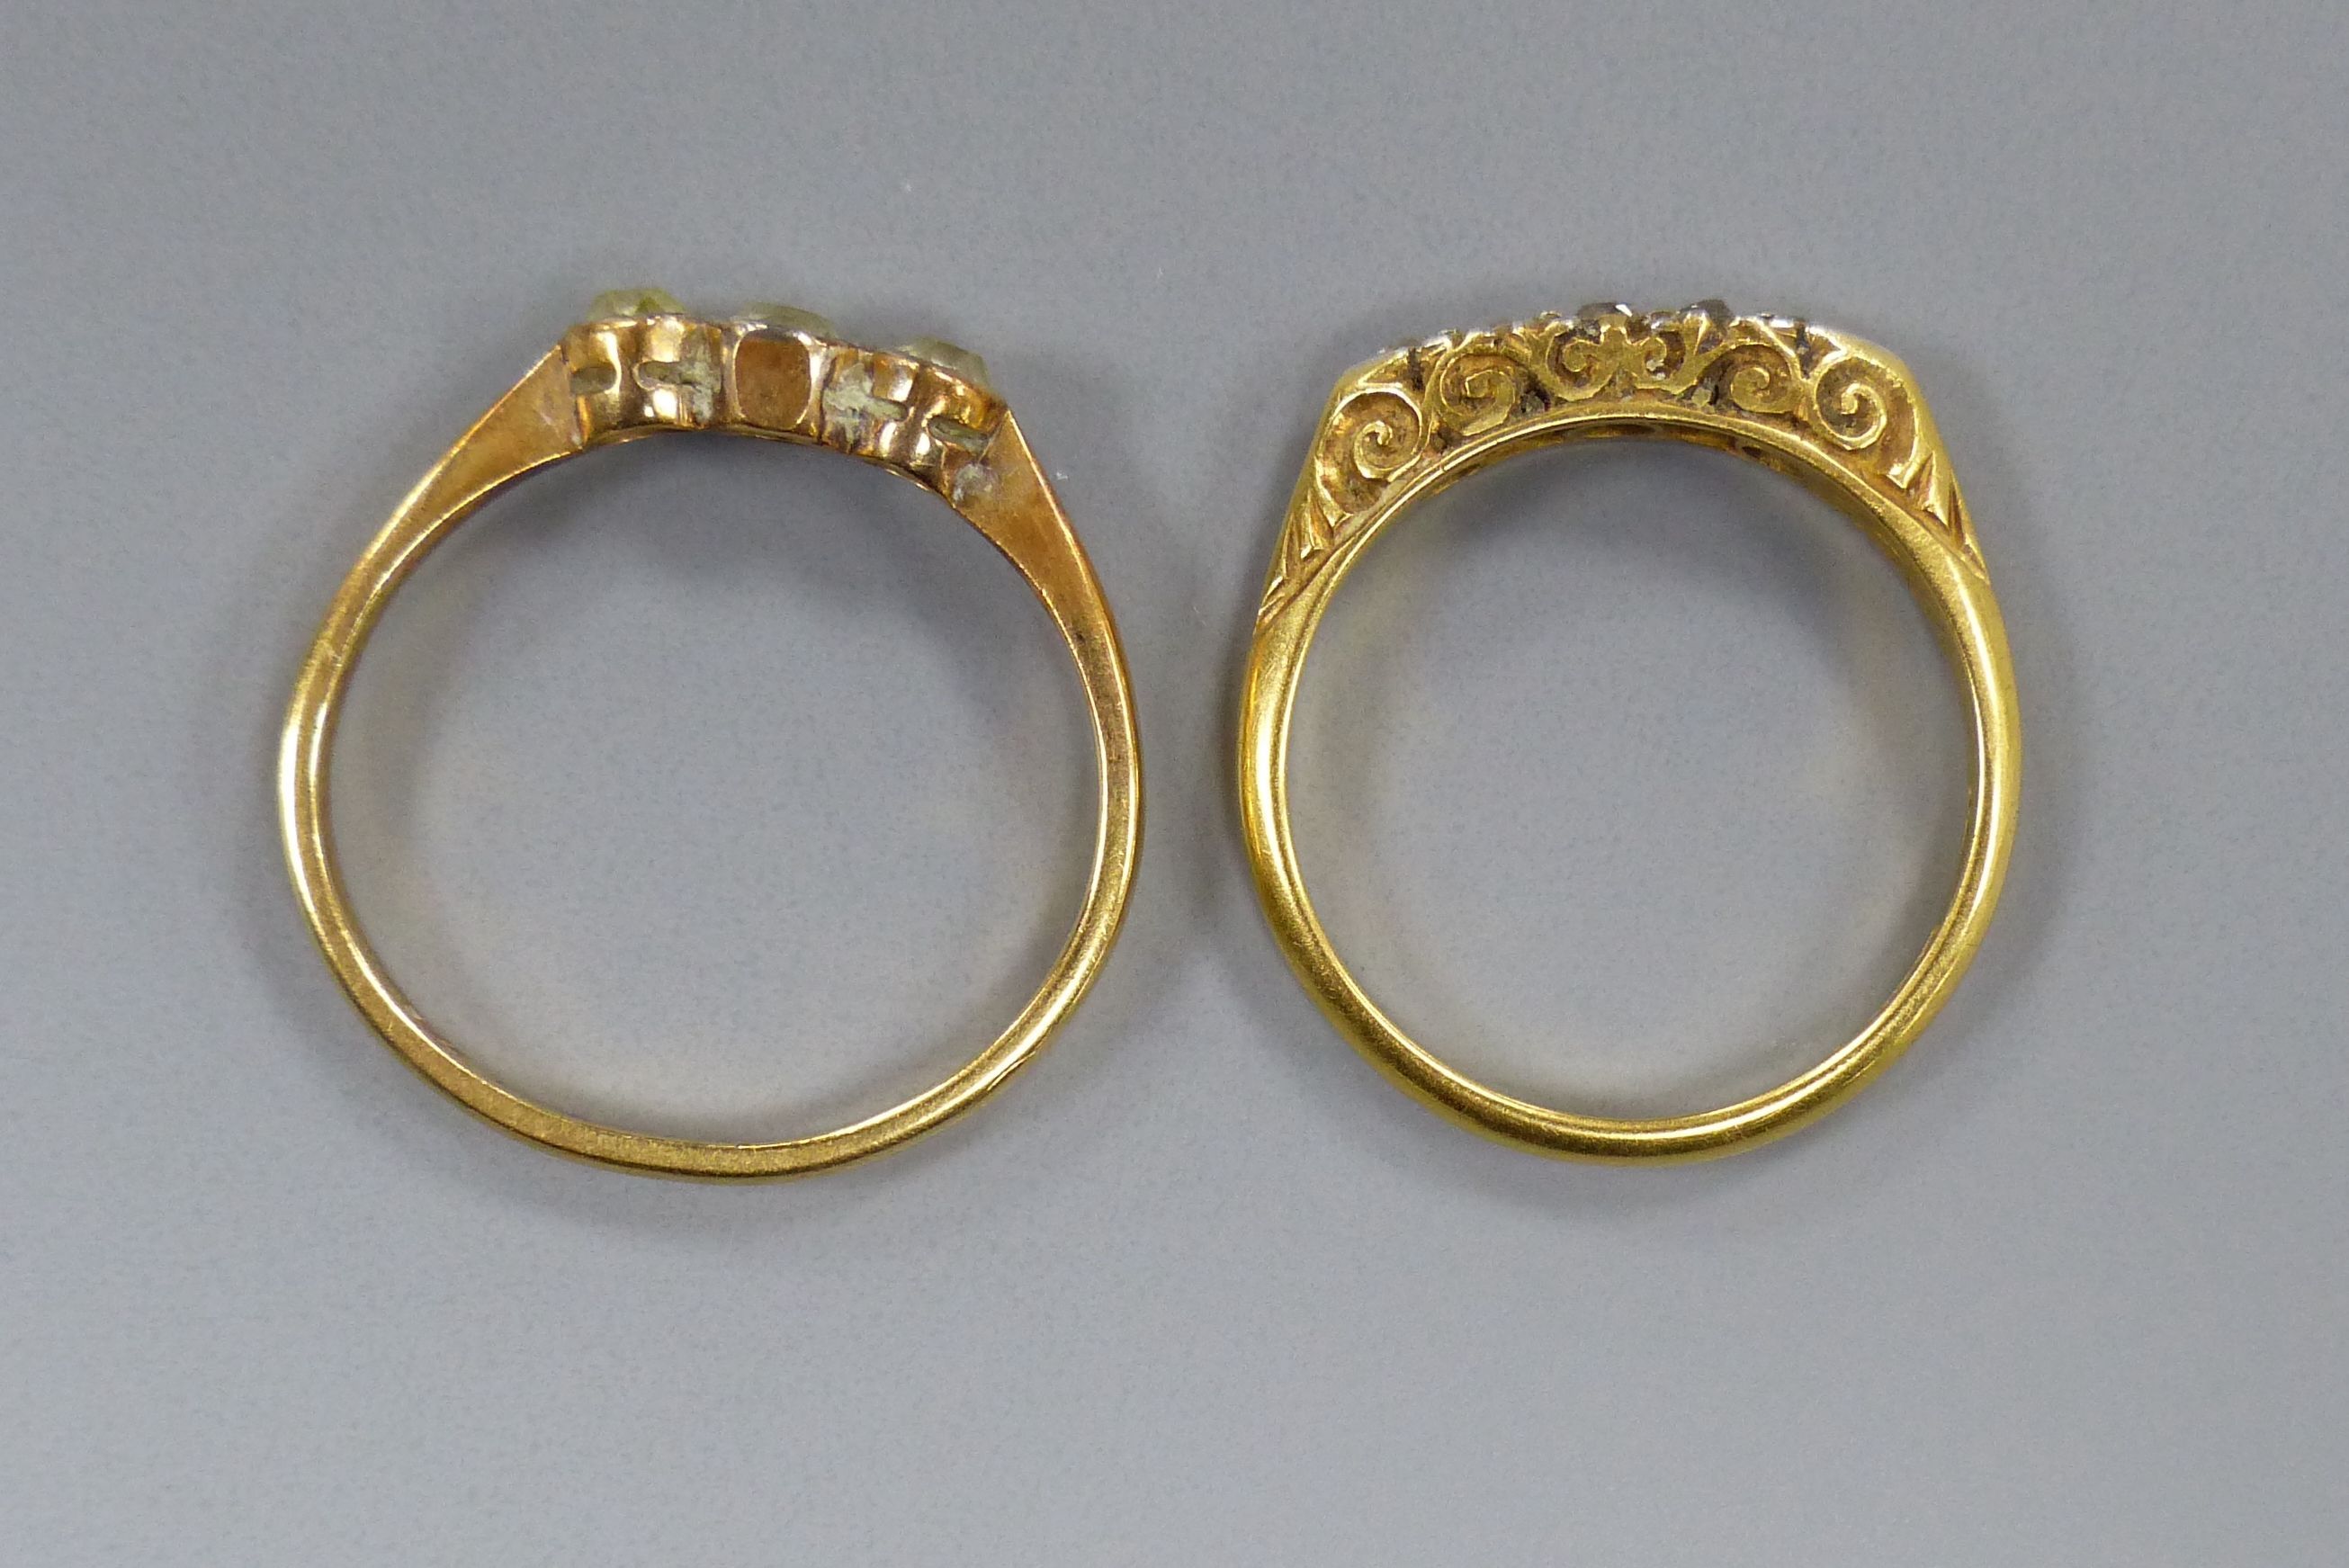 An 18ct gold three-stone diamond ring and another similar ring, gross 5.2 grams.